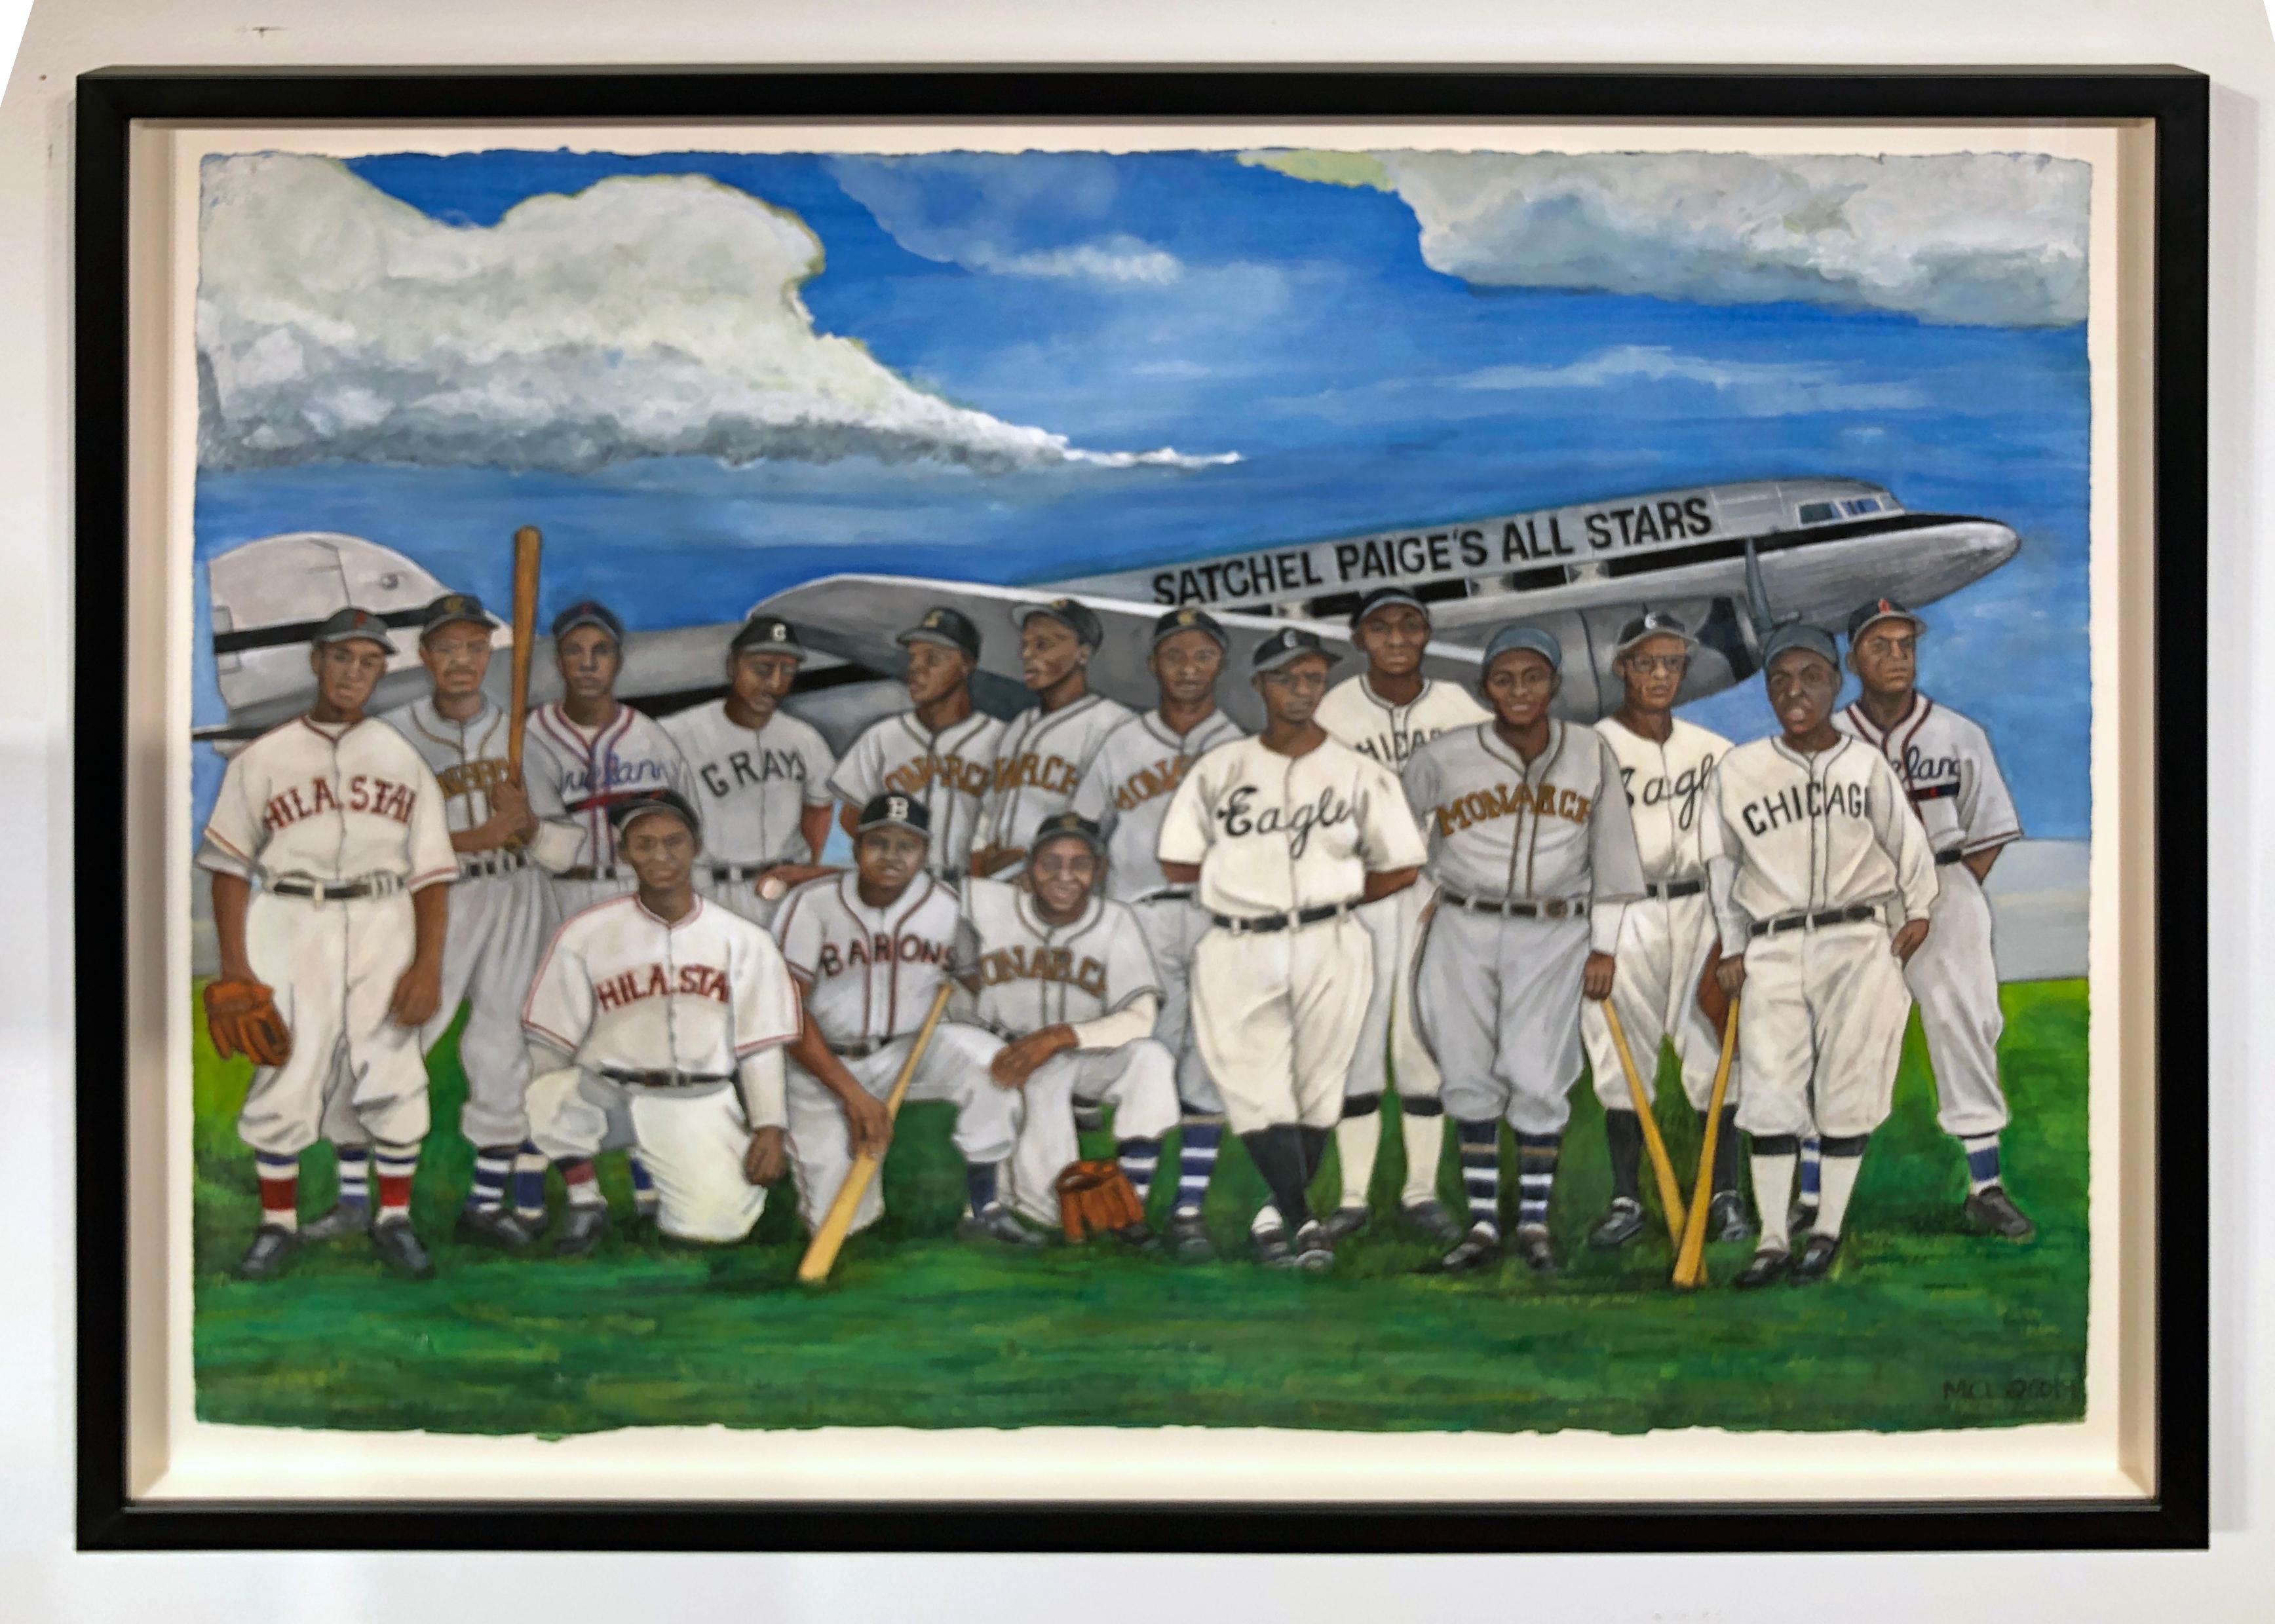 Satchel Page's All Stars from 1946 Baseball Team, Original Watercolor on Paper - Art by Margie Lawrence